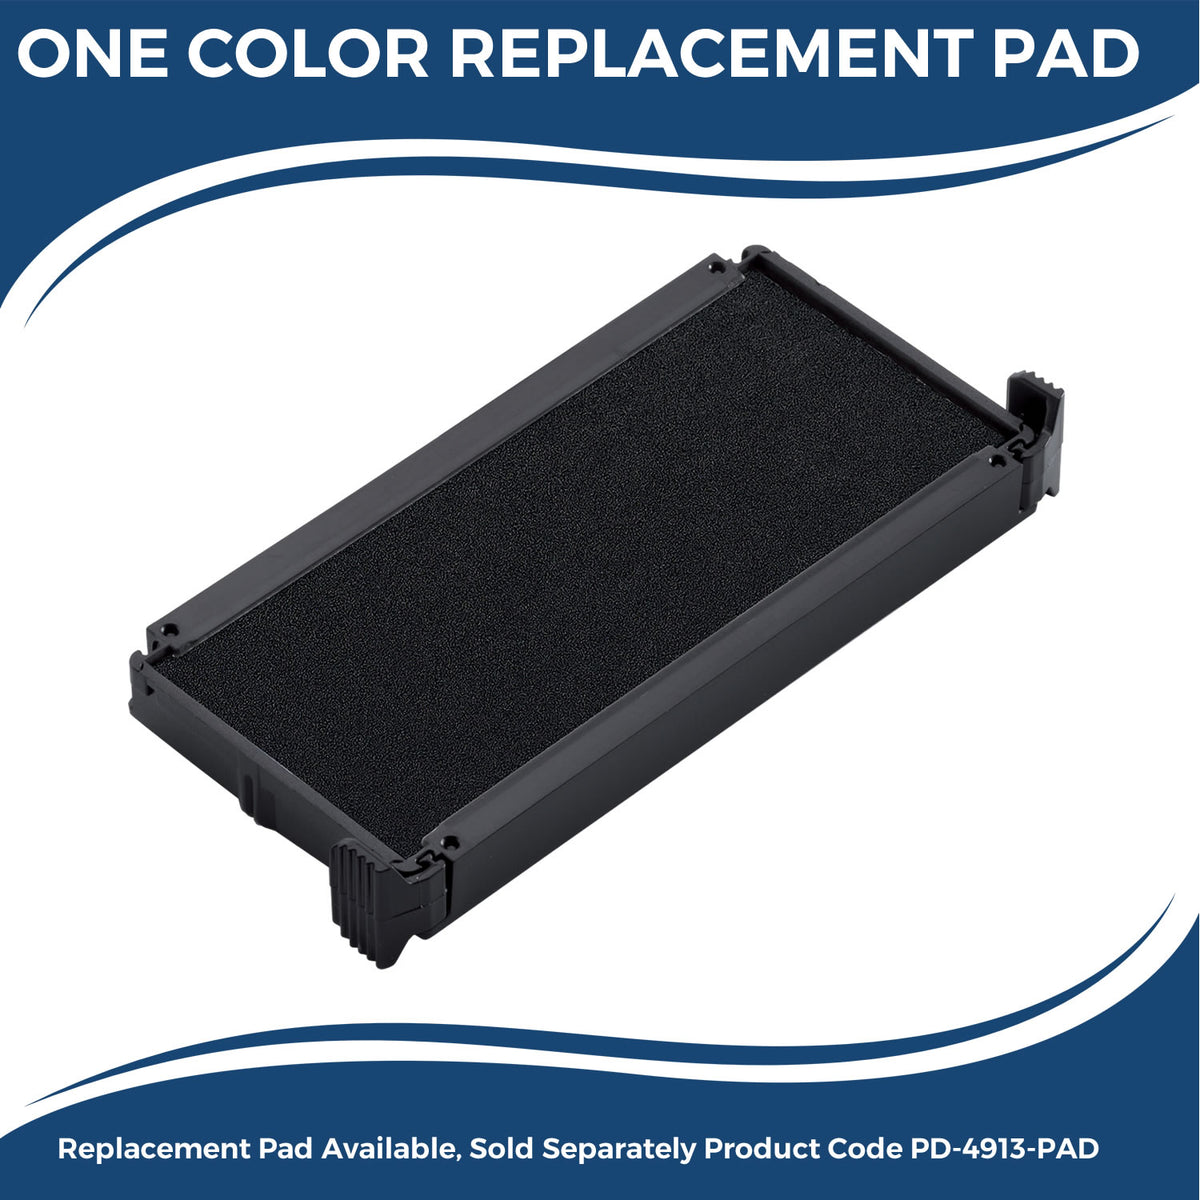 Large Self-Inking COD Outline Stamp 4862S Large Replacment Pad